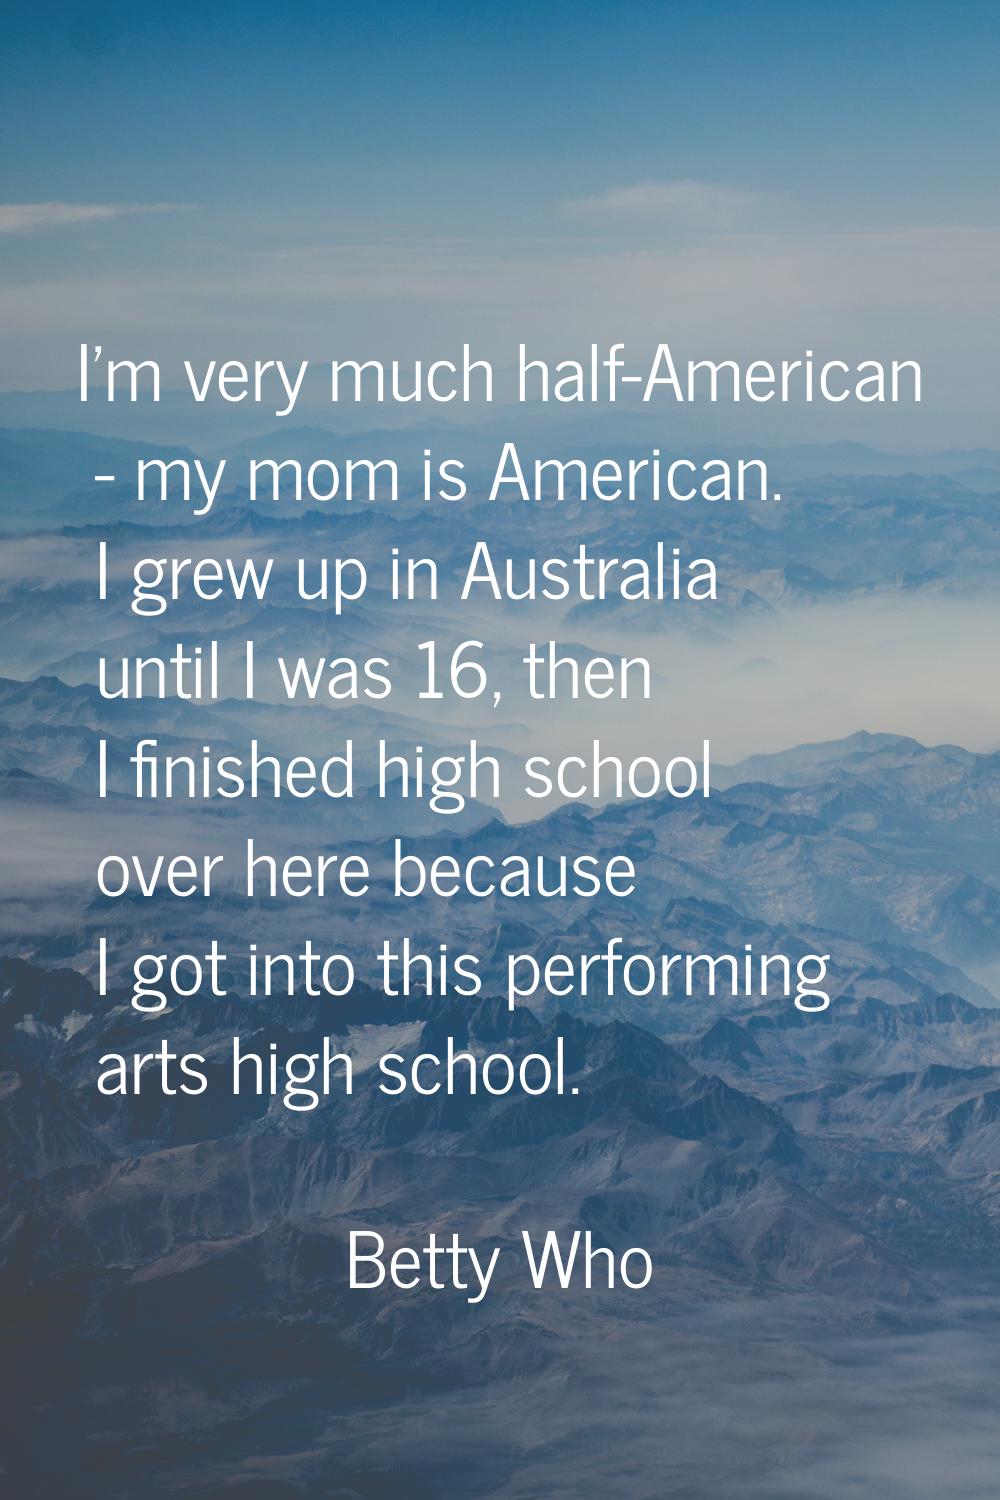 I'm very much half-American - my mom is American. I grew up in Australia until I was 16, then I fin